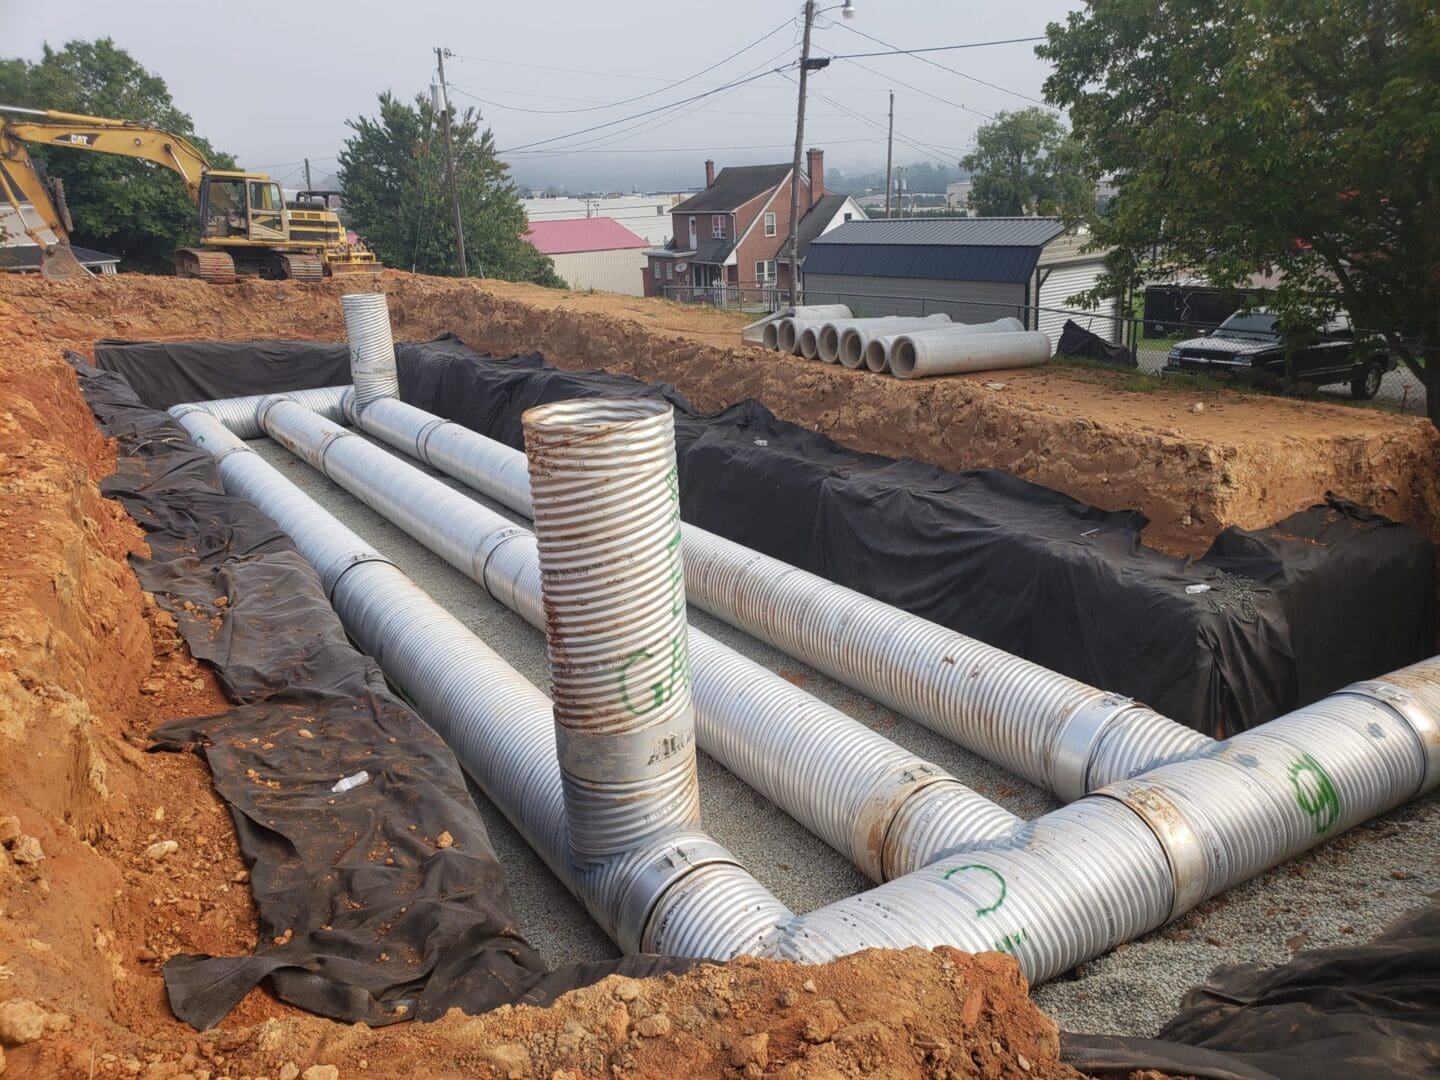 A large pipe laying on top of the ground.